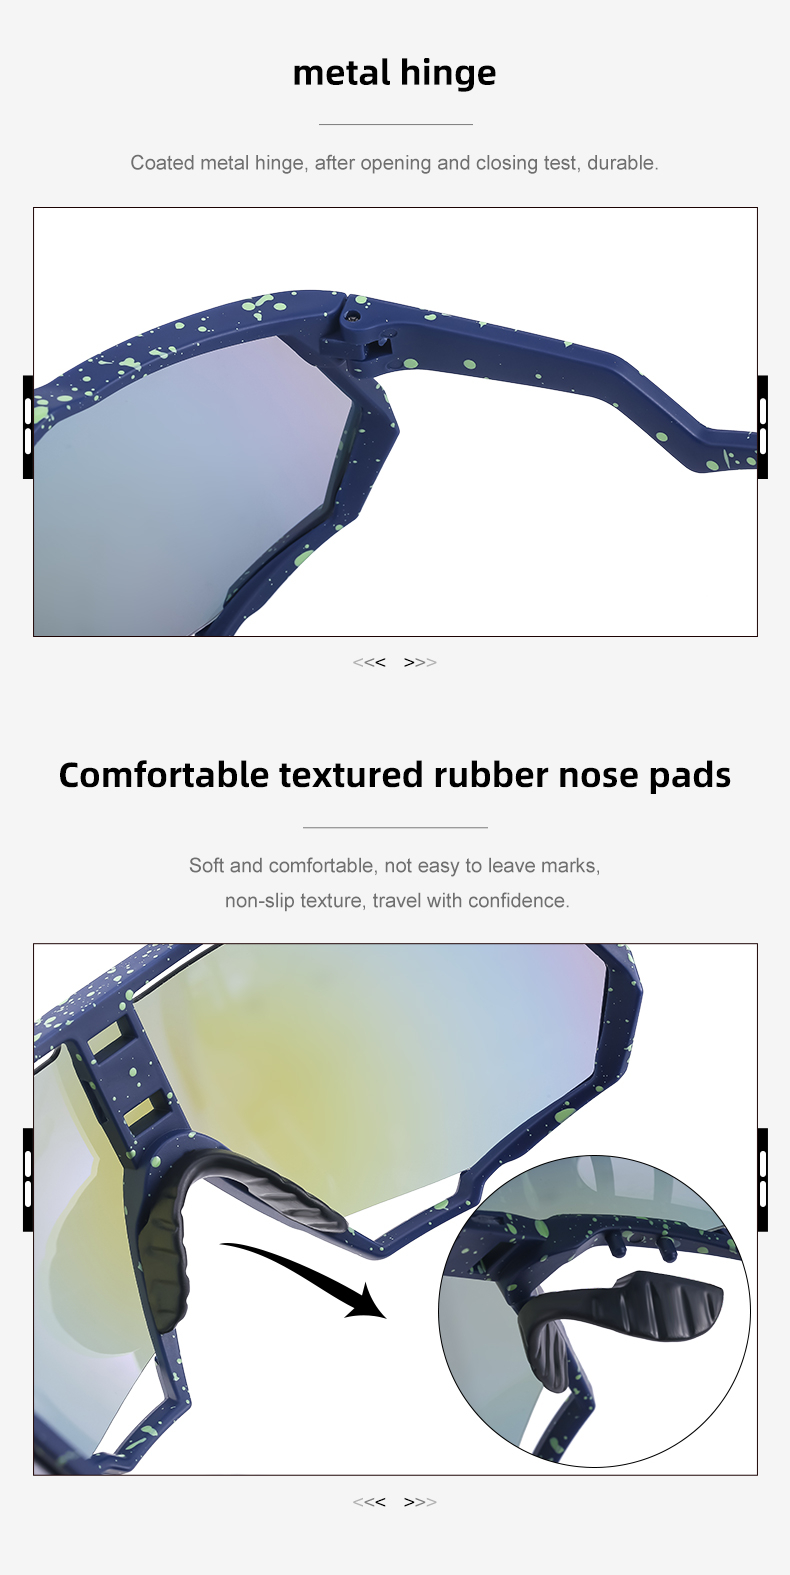 Best Shield Sunglasses in Canada - Les Value